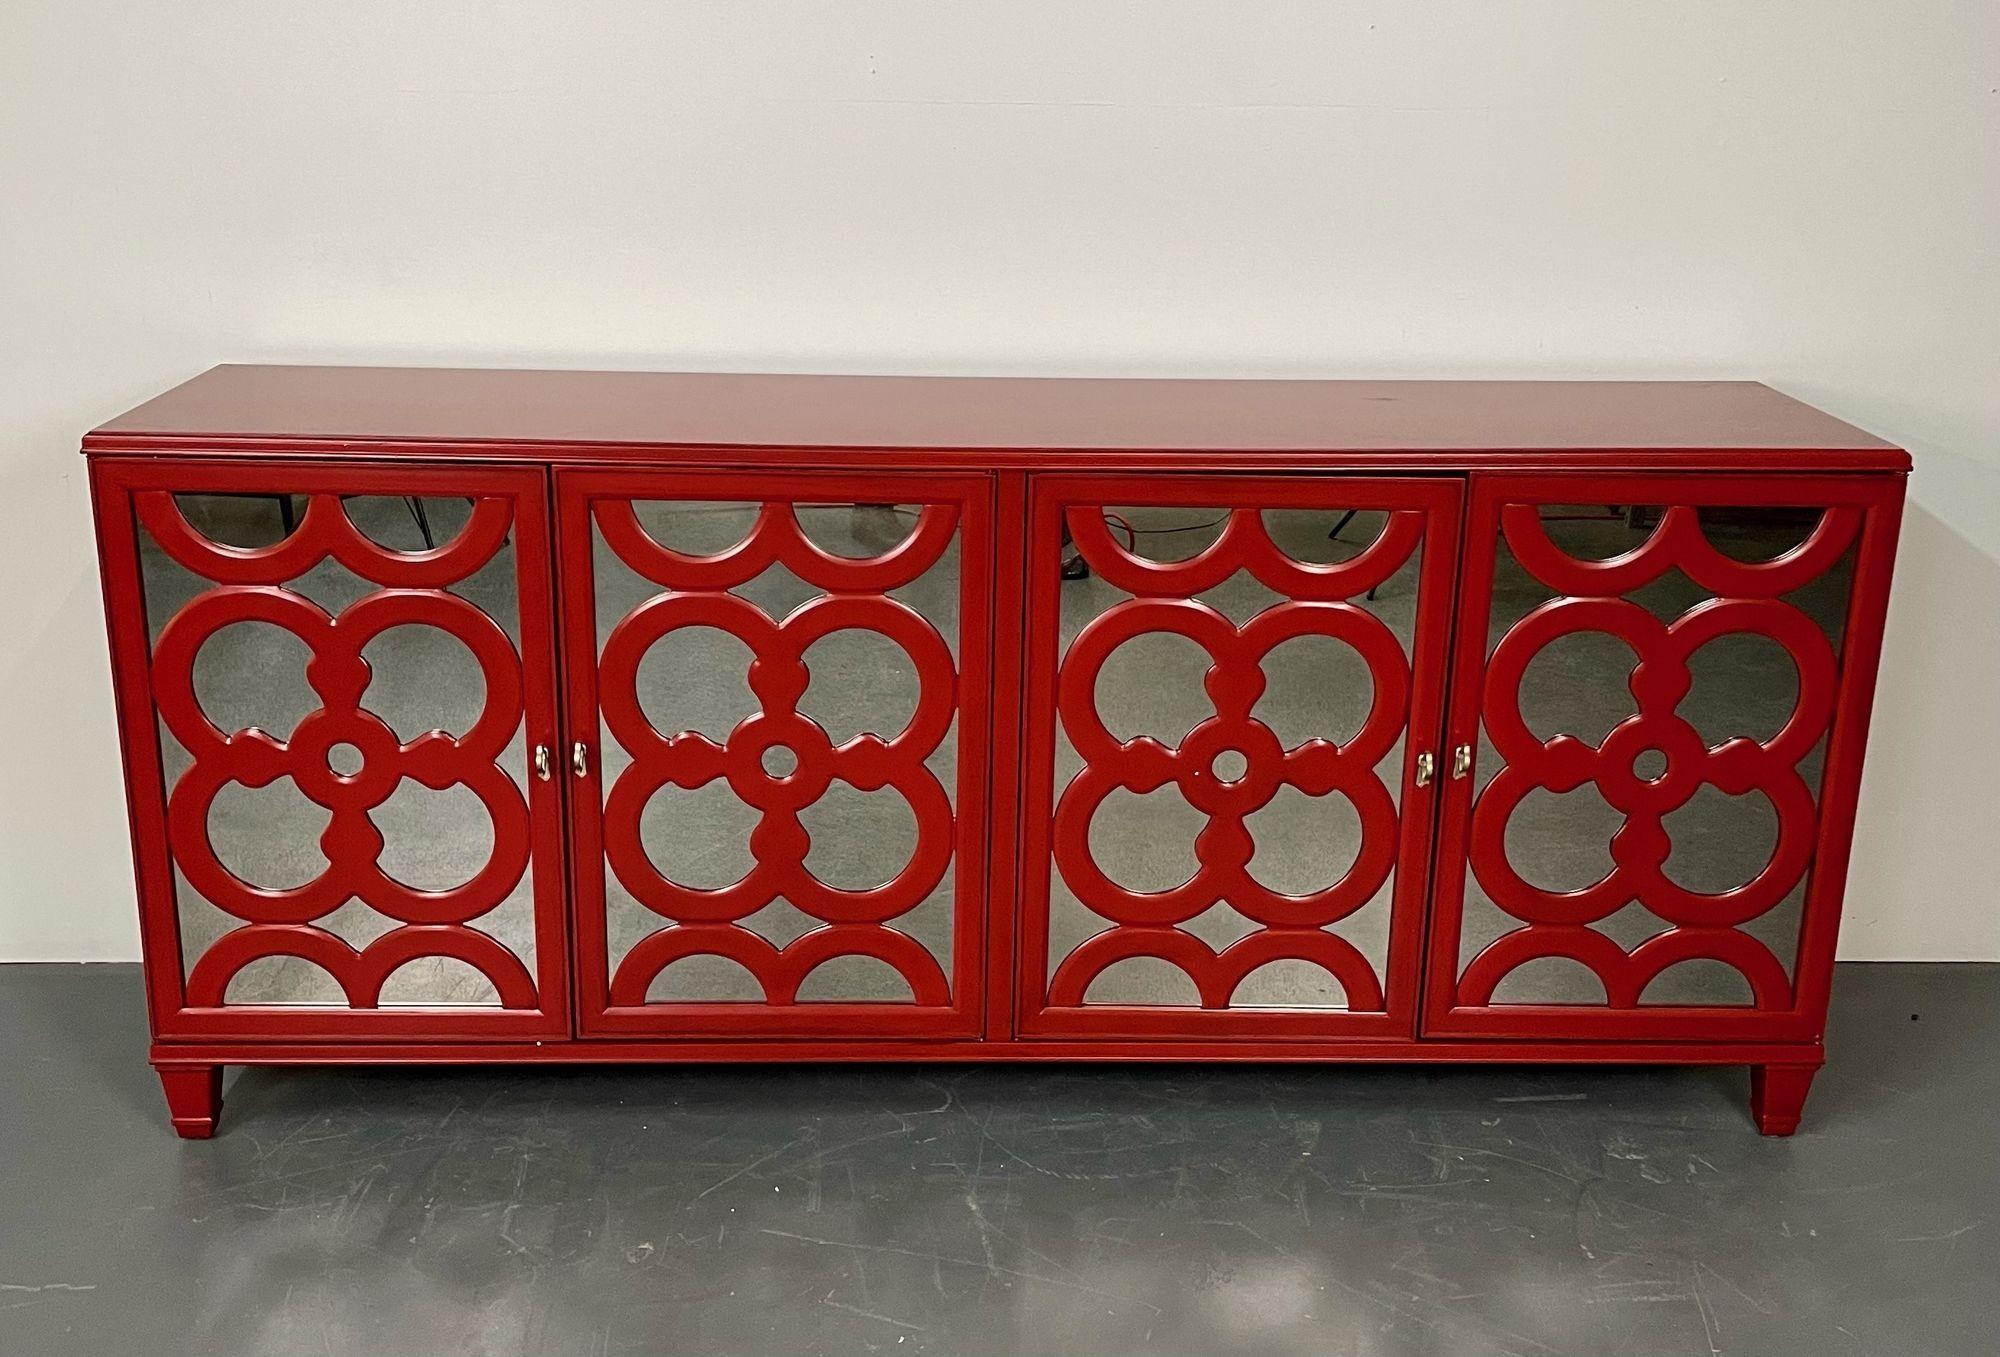 Modern sideboard, dresser or chest, red lacquered, mirrored.
A newly manufactured sideboard in a red lacquered and mirror finish. The case with four doors having mirrored fronts and circular wood design leading to fitted drawers interiors with